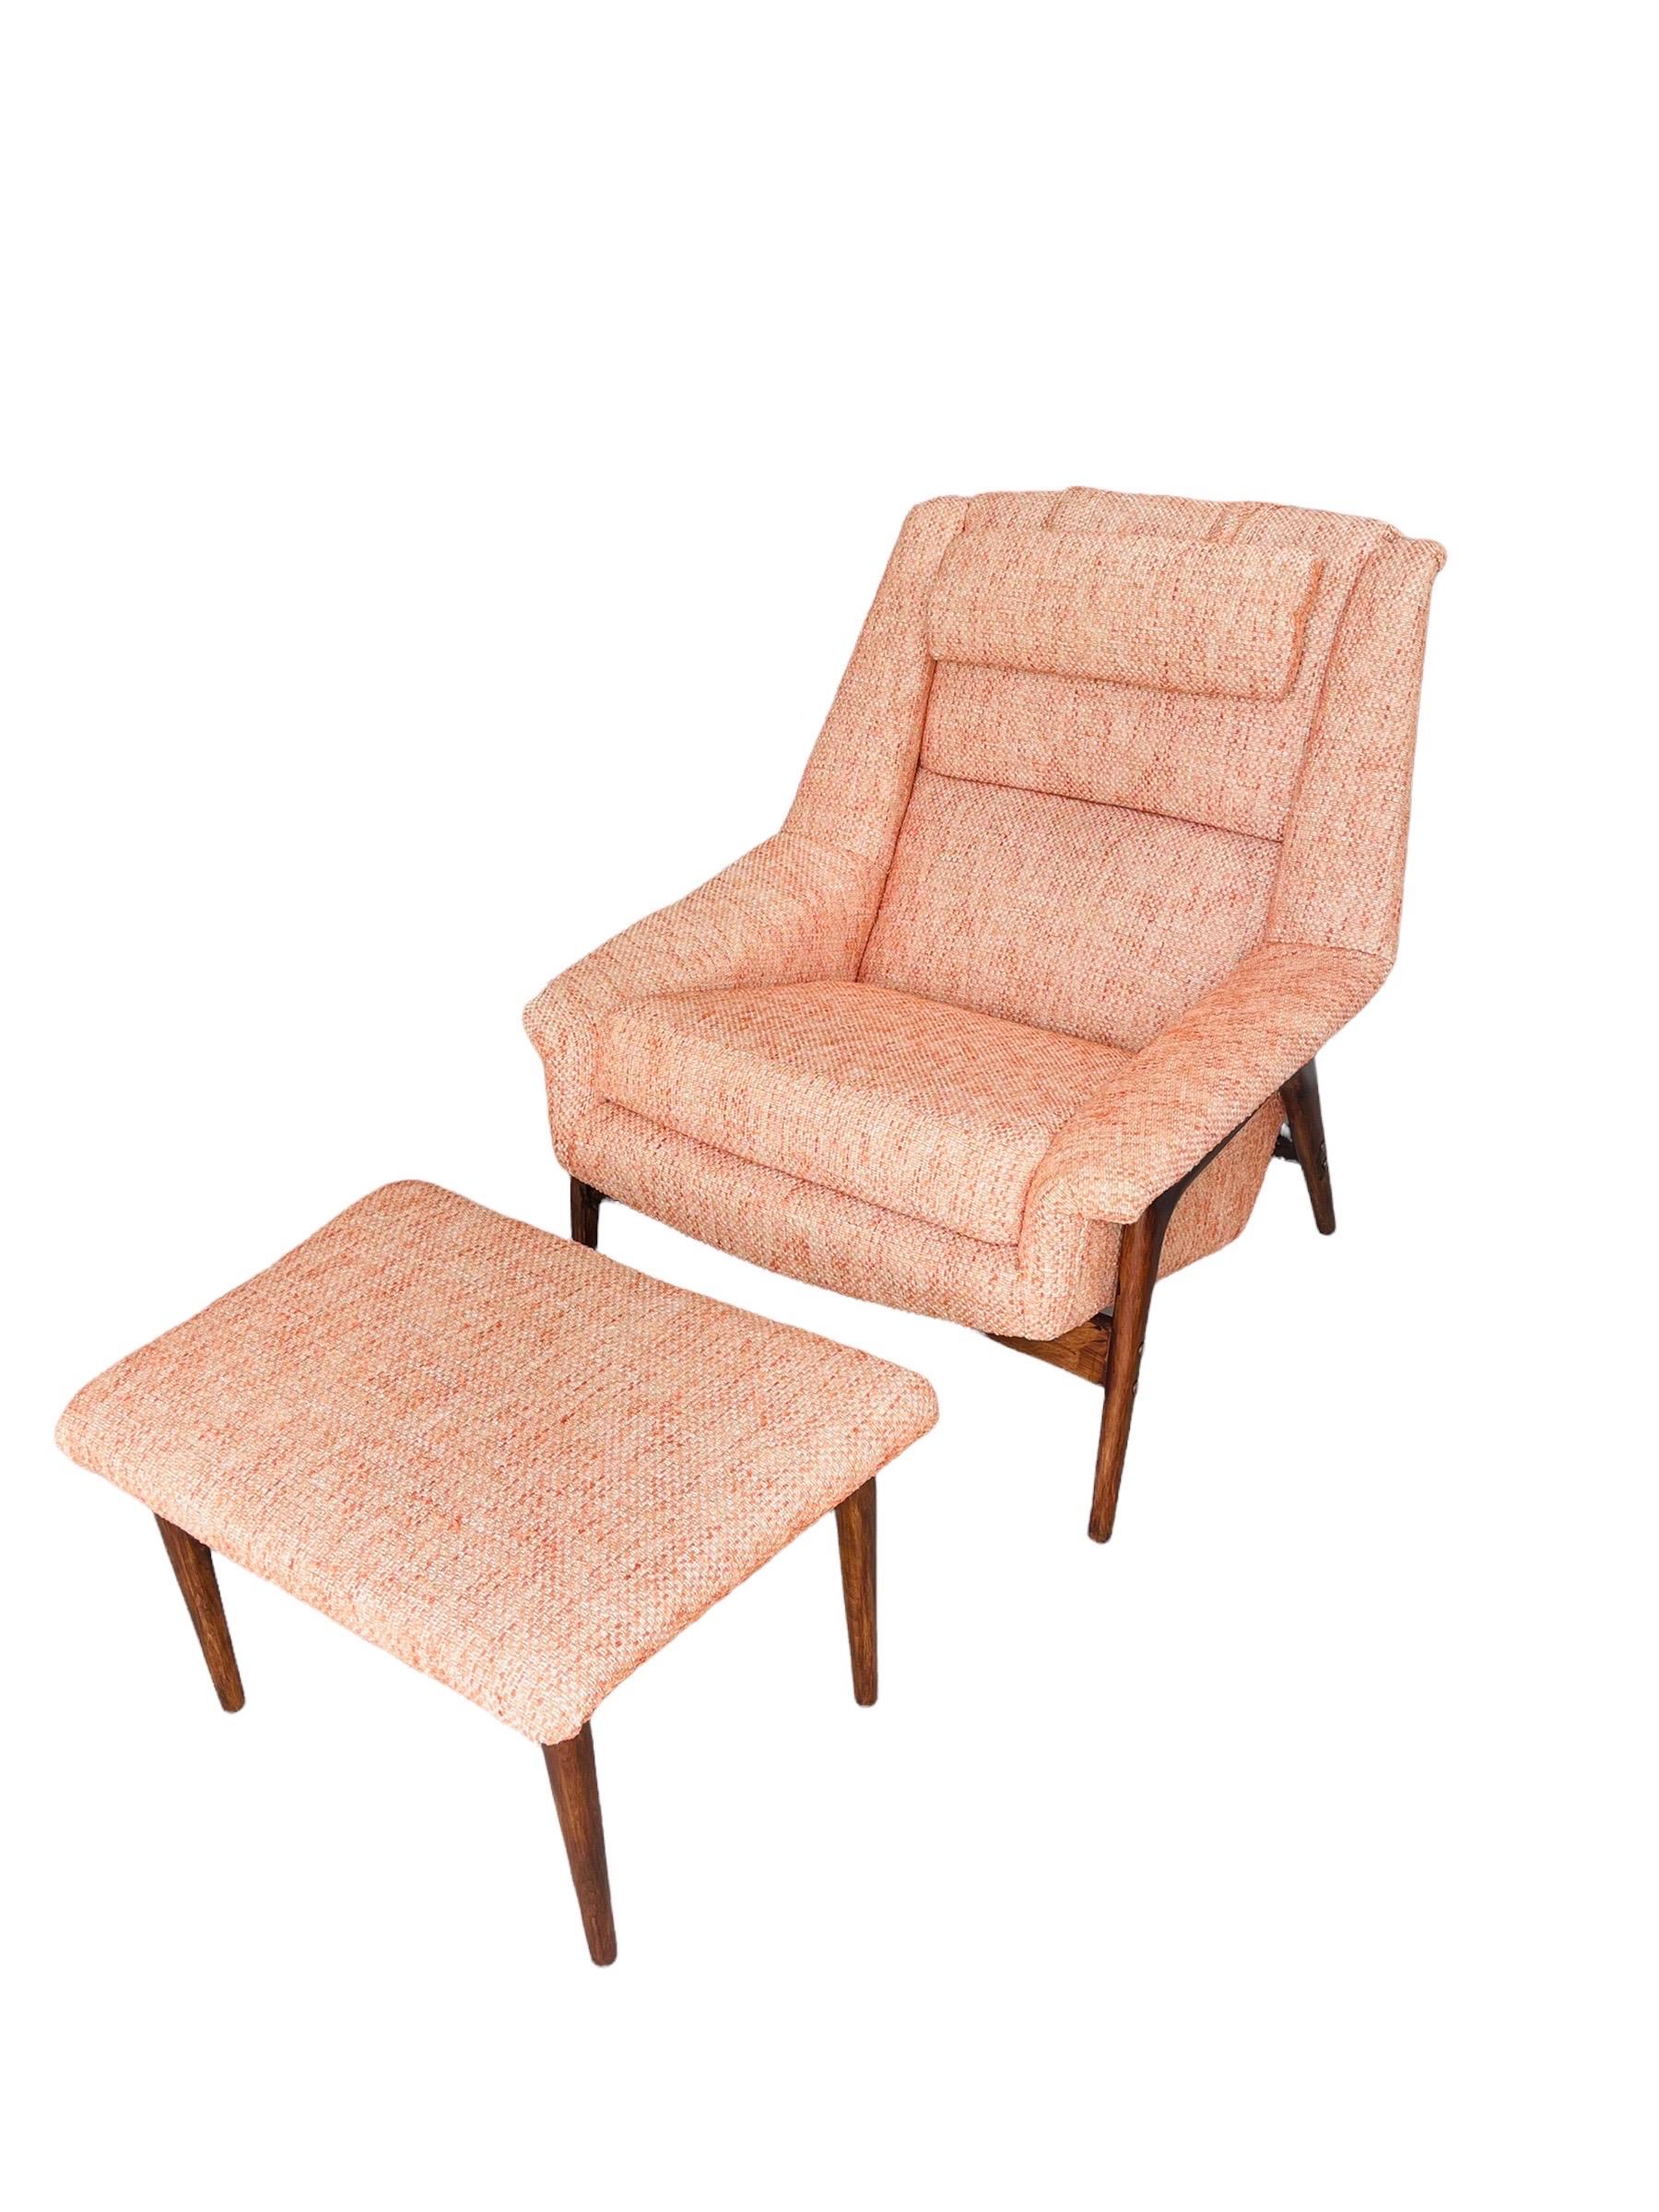 Folke Ohlsson Walnut Lounge Chair & Ottoman for DUX In Good Condition In Brooklyn, NY